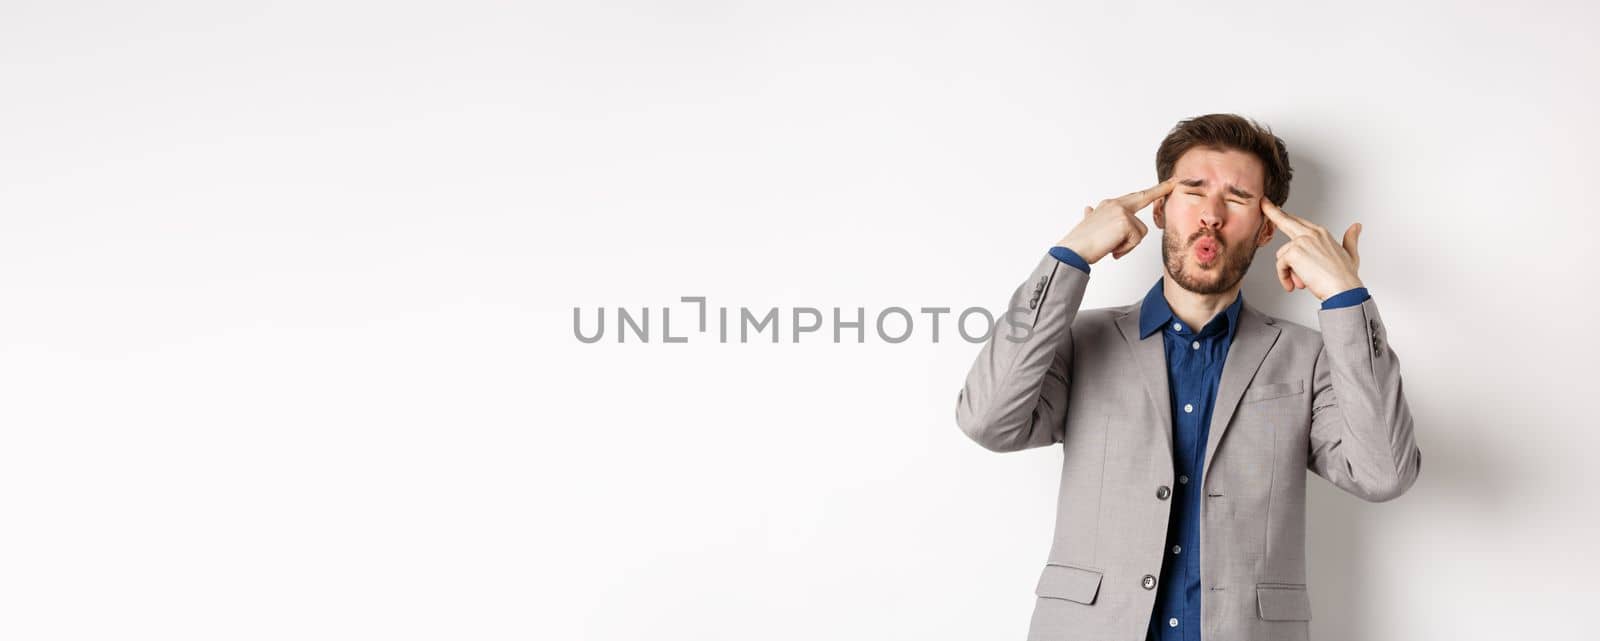 Distressed and tensed businessman pointing at head and complaining, feeling annoyed with situation blowing his mind, standing bothered on white background by Benzoix